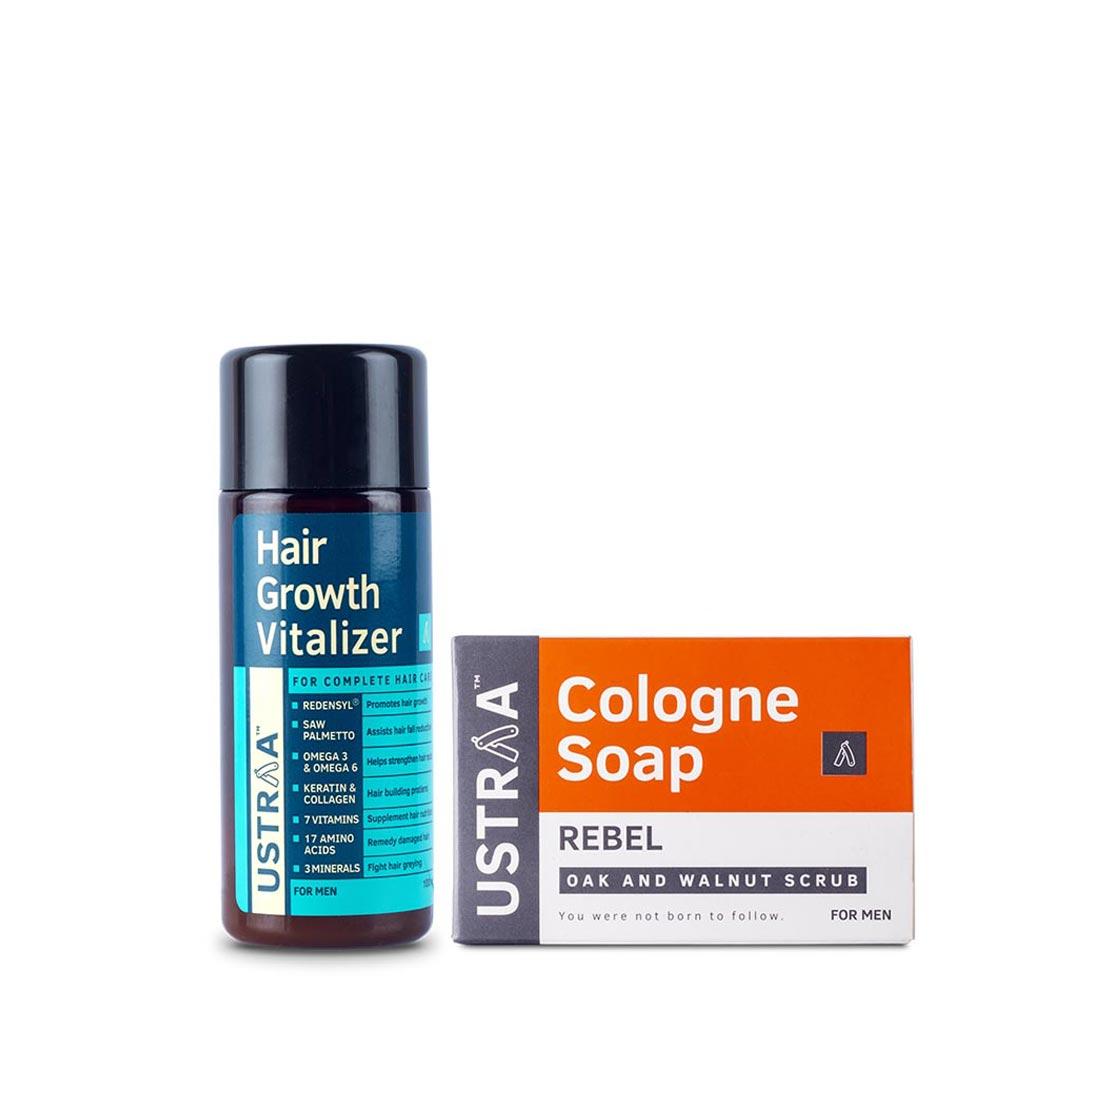 Hair Growth Vitalizer & Rebel Cologne Soap